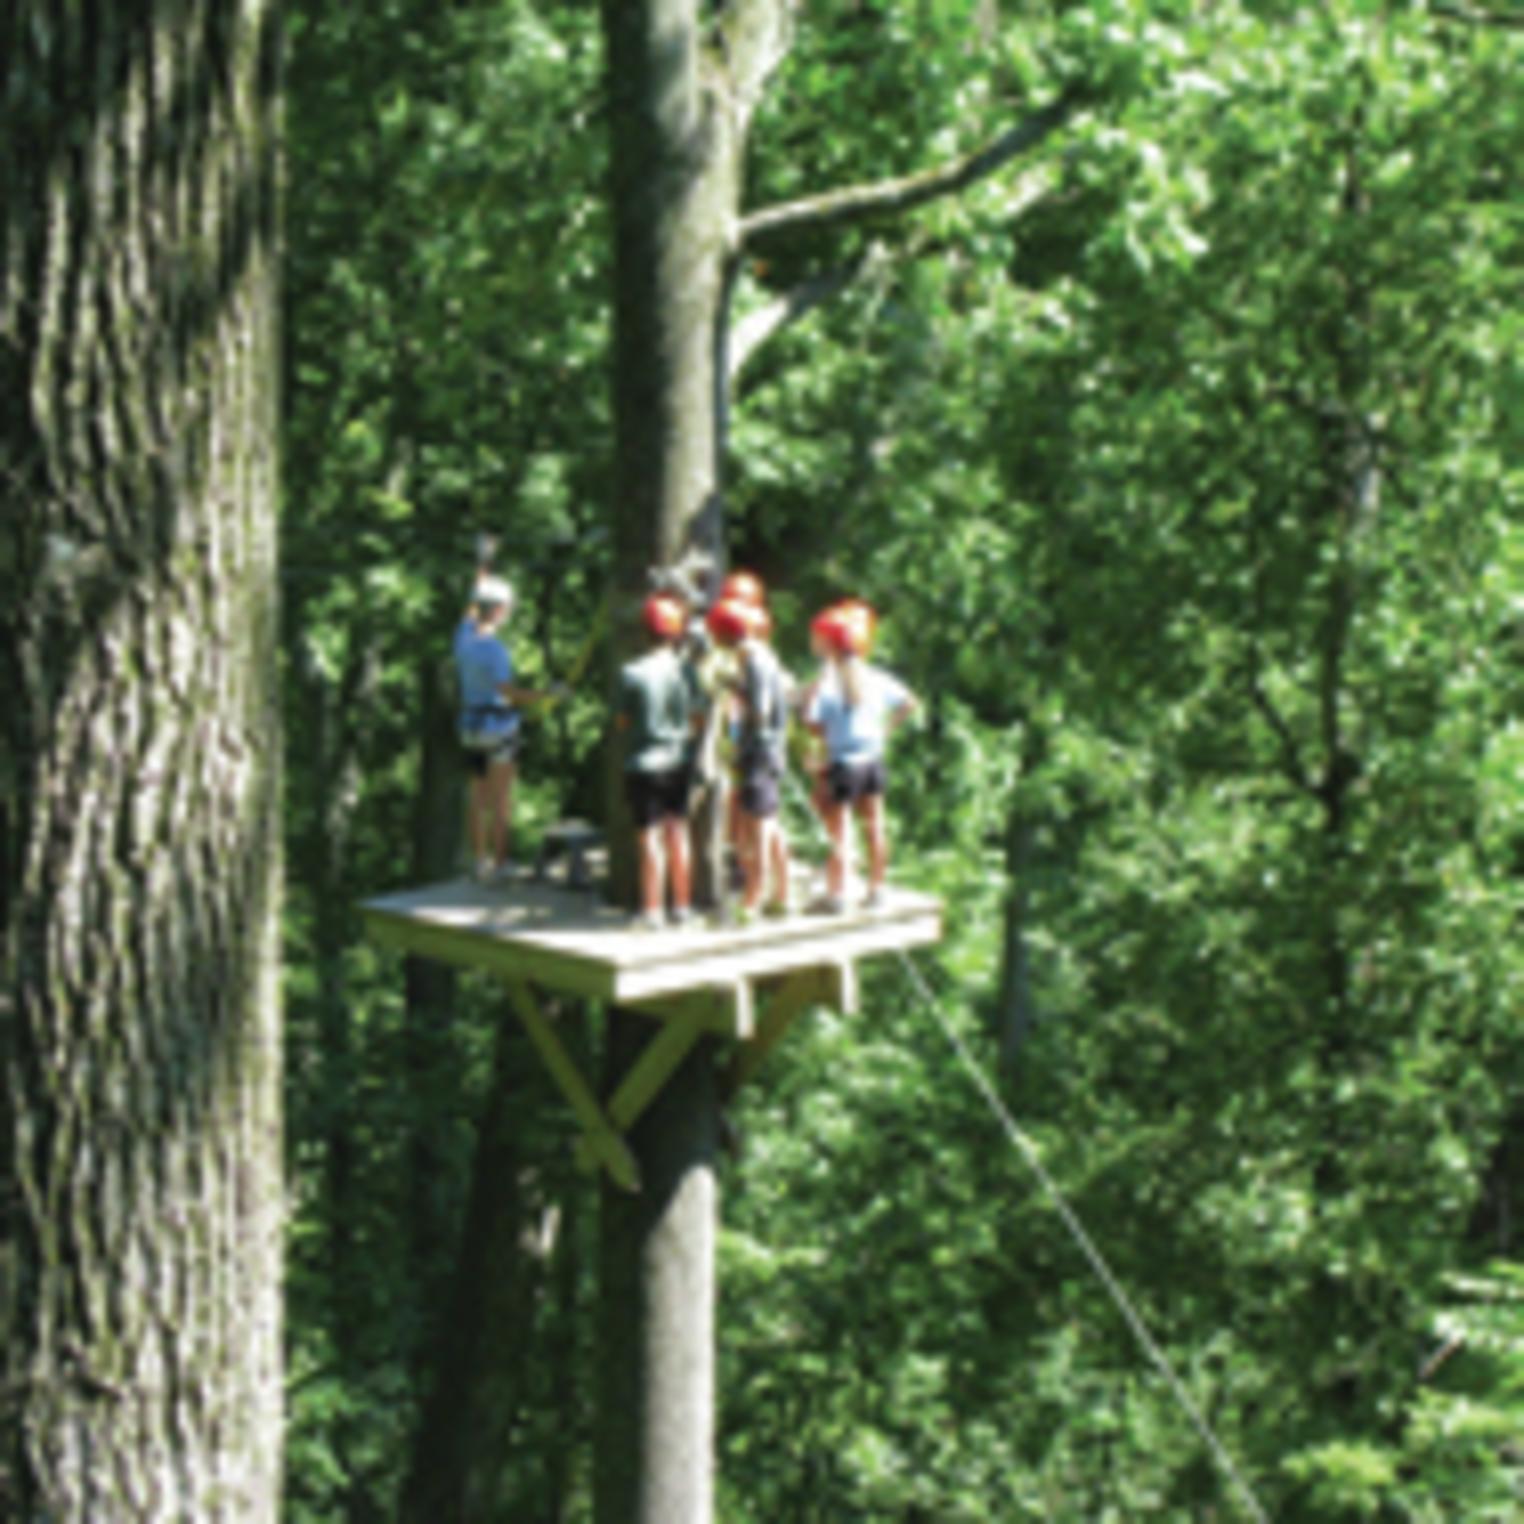 Vertical Trek Zip Line Canopy Tour in Central PA at Roundtop Mountain Resort